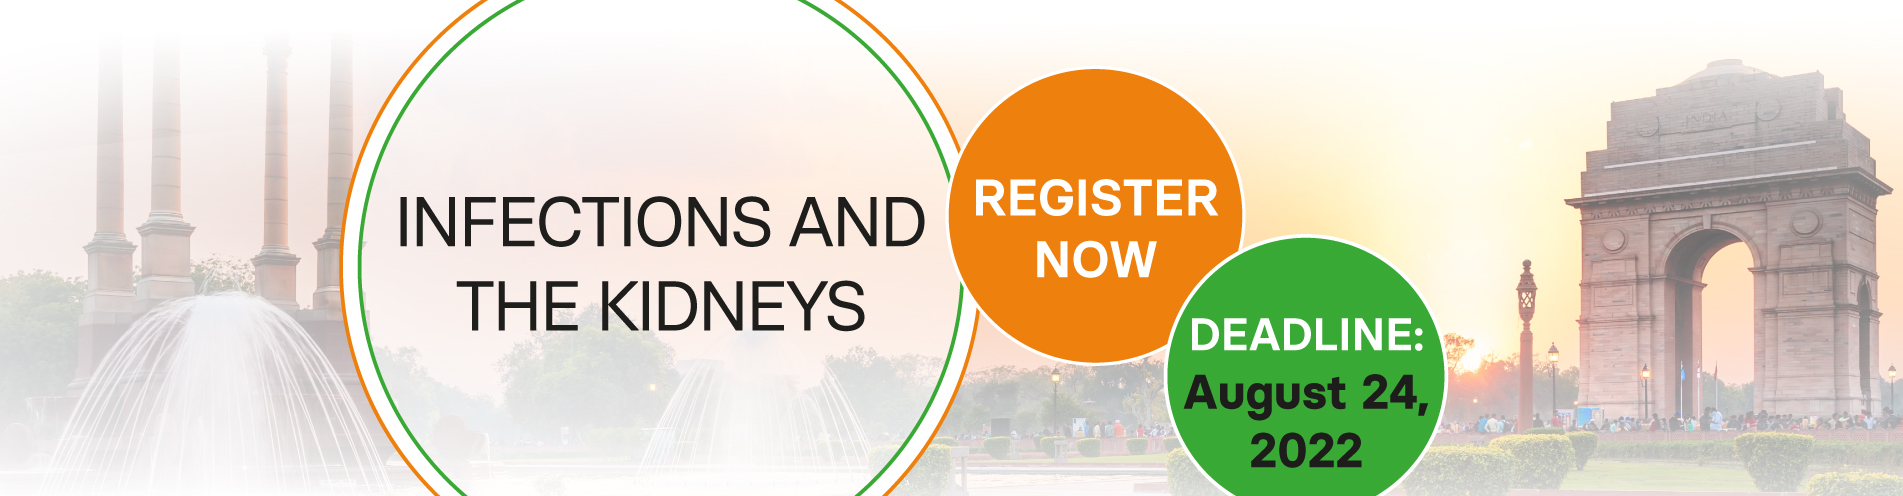 Join the ISN Frontiers Meeting on Infections and the Kidney in New Delhi - Sept 22-25, 2022